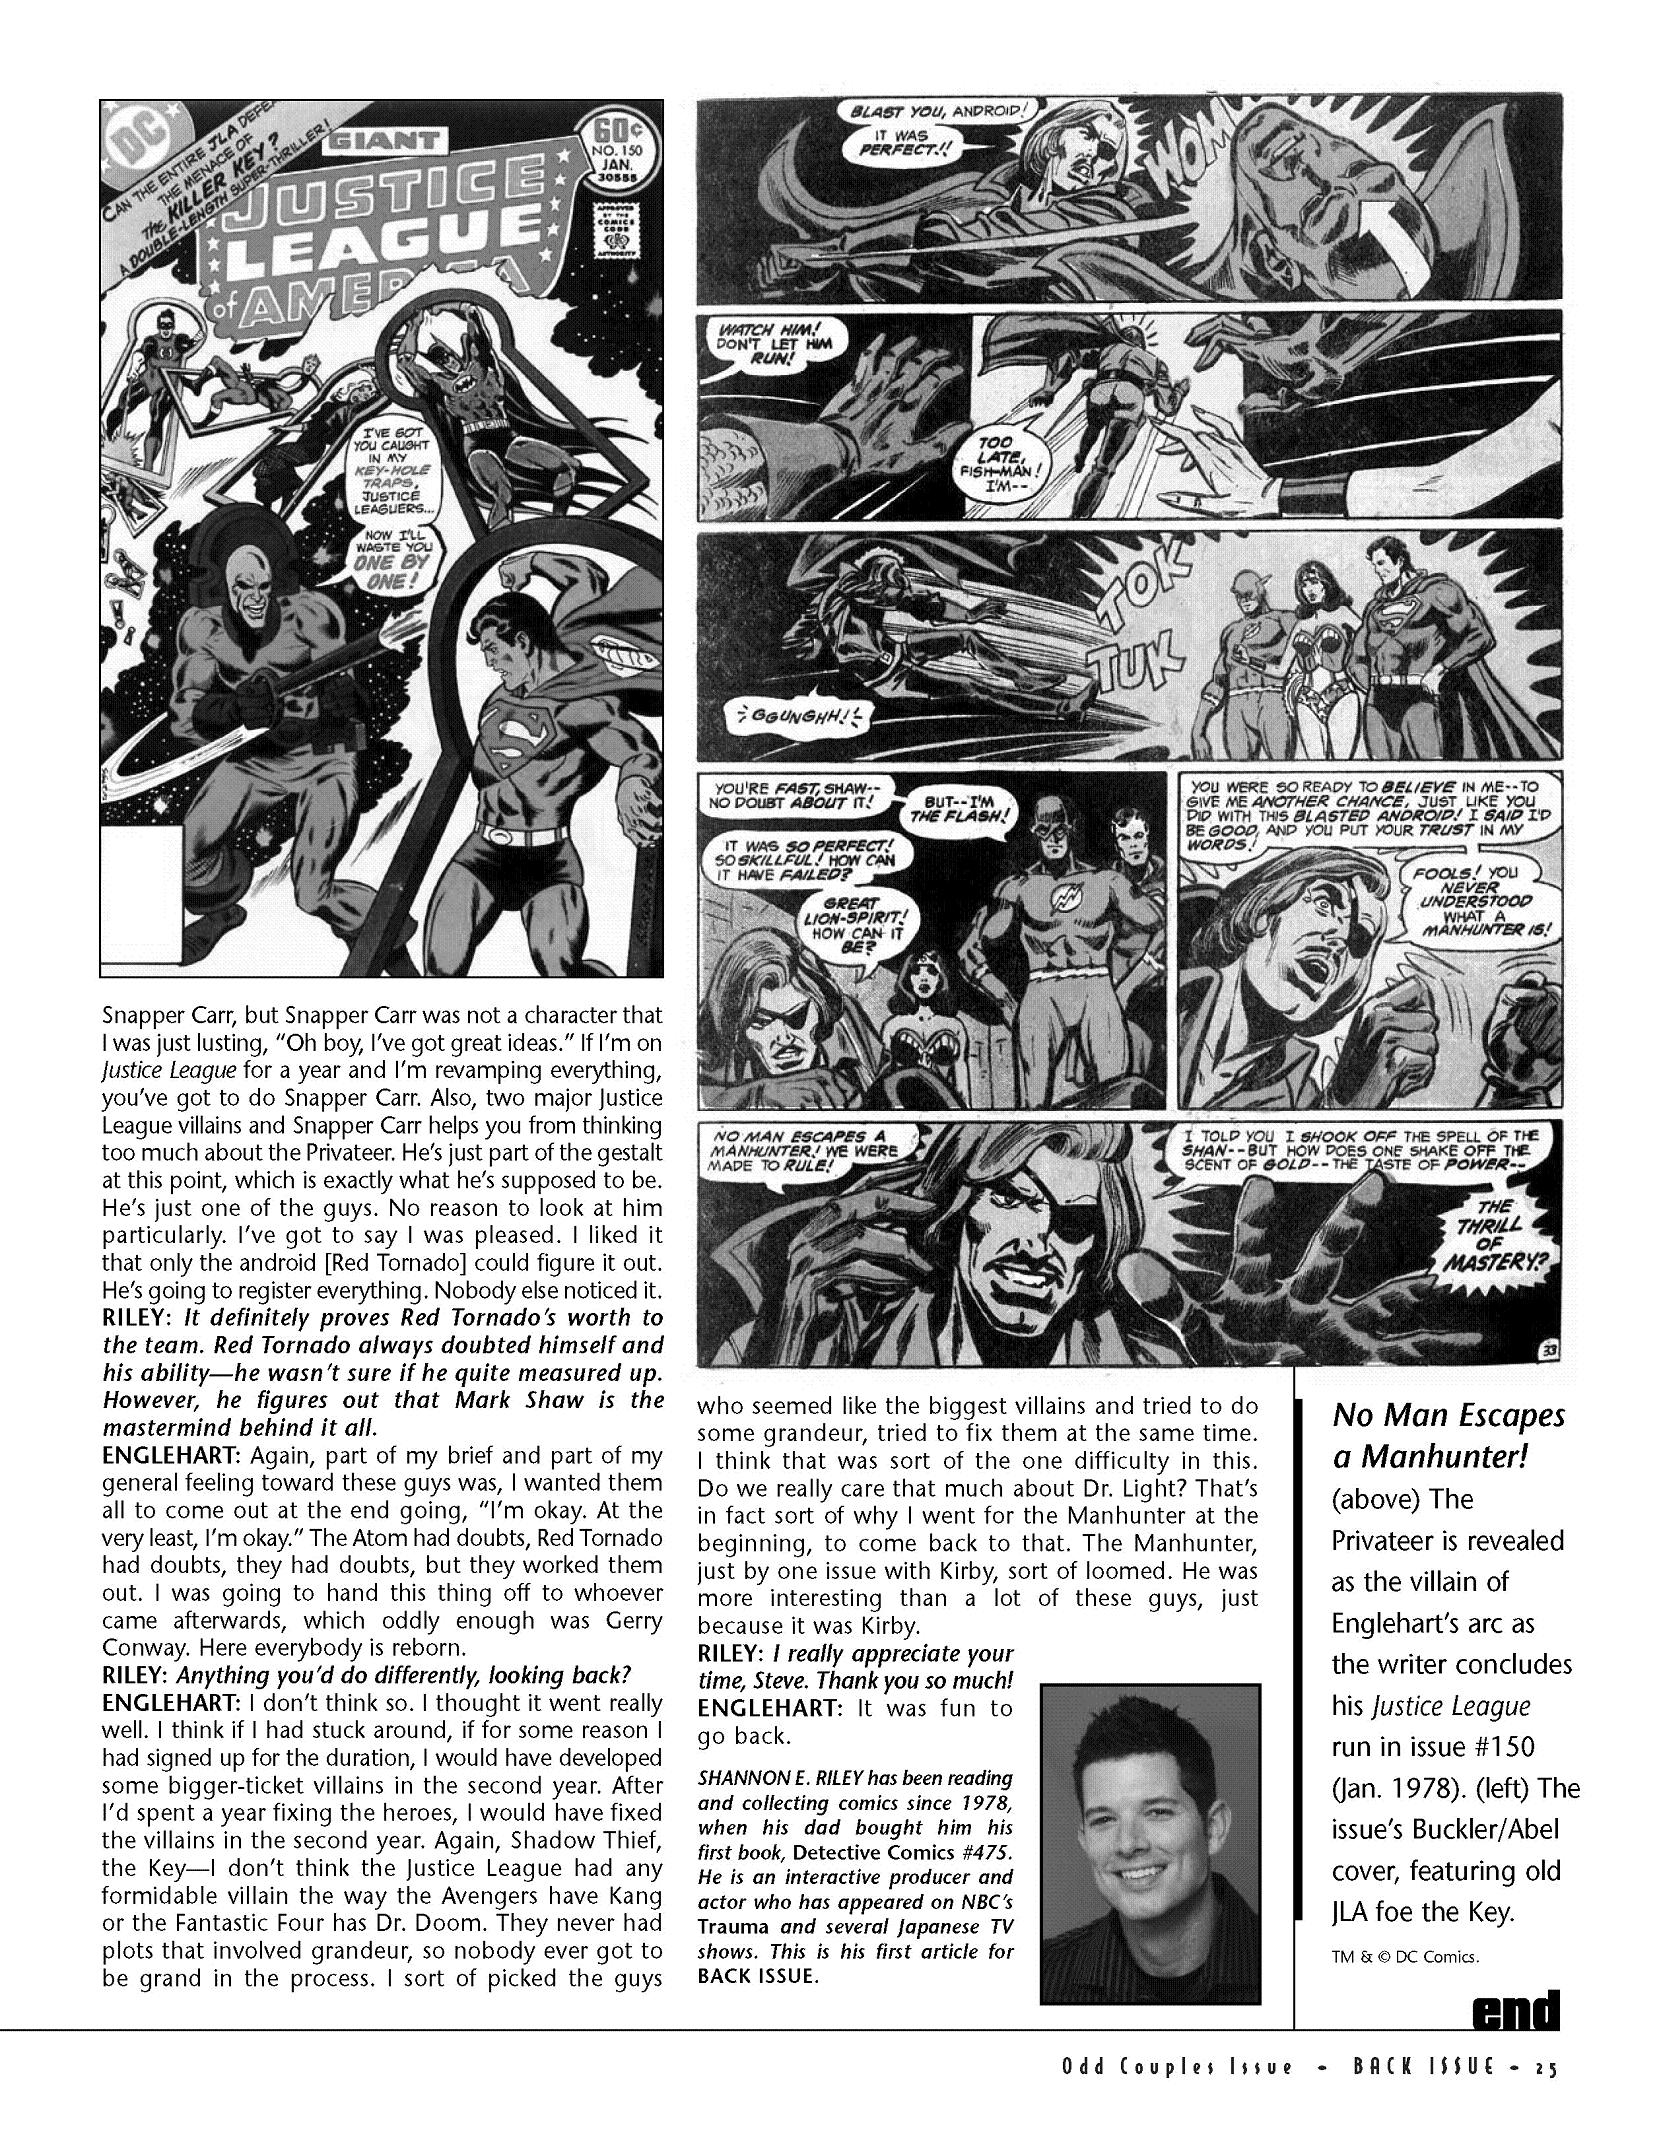 Read online Back Issue comic -  Issue #45 - 27